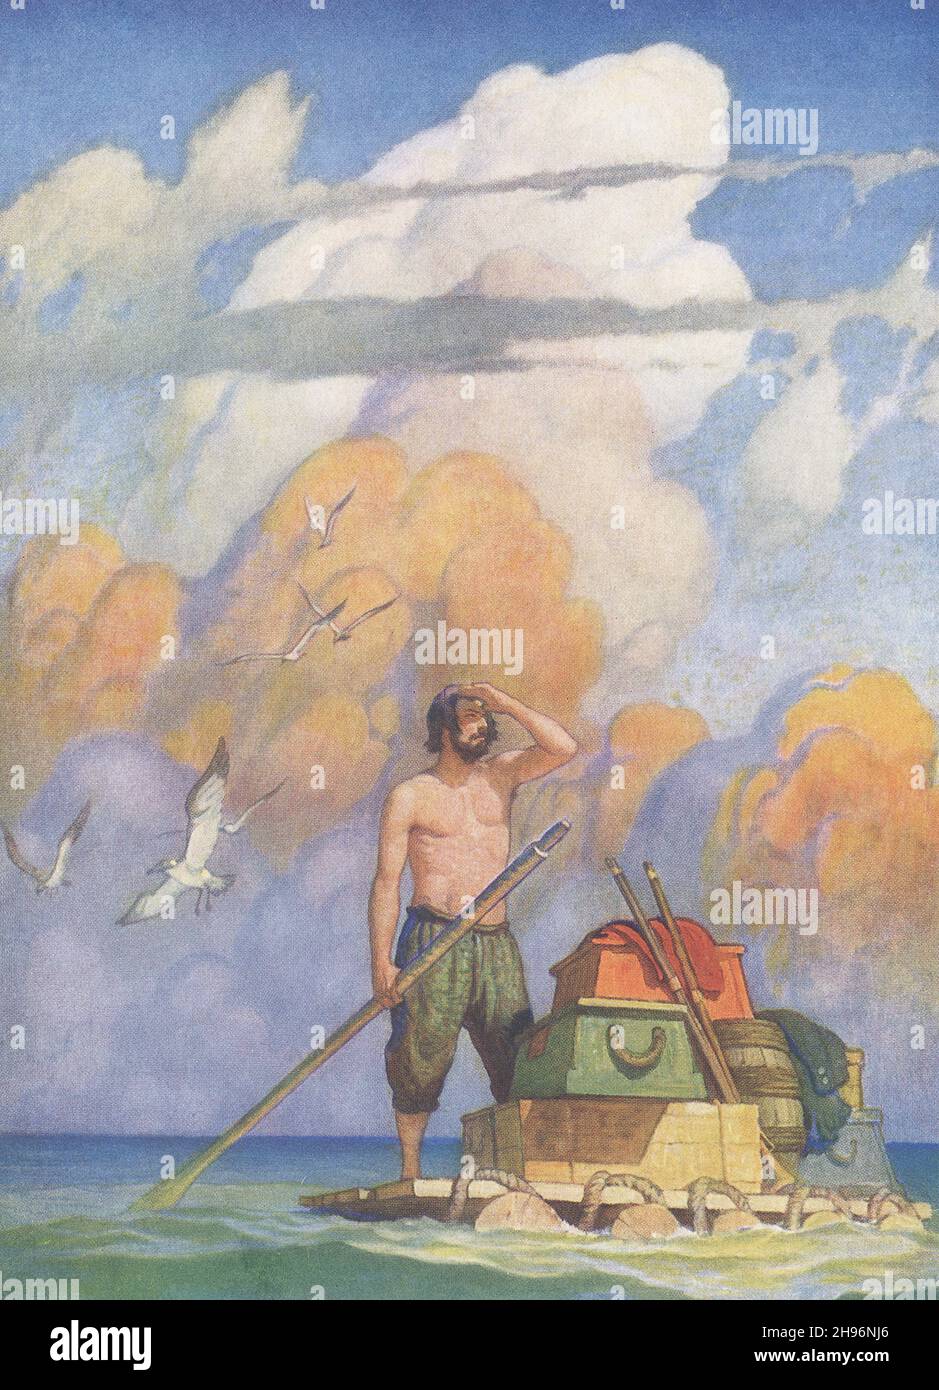 The caption for this 1945 image to accompany Daniel DeFoe's Robinson Crusoe reads: 'For a mile or thereabouts my raft went very well. 'The illustration is by N C Wyeth Robinson Crusoe is a novel written by the English novelist Daniel Defoe and published in 1719. A fictional autobiography,  it tells the tale of an English castaway named  Robinson Crusoe who spent 28 years on a remote tropical island near Venezuela before he was rescued. Robinson Crusoe is a novel written by the English novelist Daniel Defoe and published in 1719. A fictional autobiography,  it tells the tale of an English casta Stock Photo